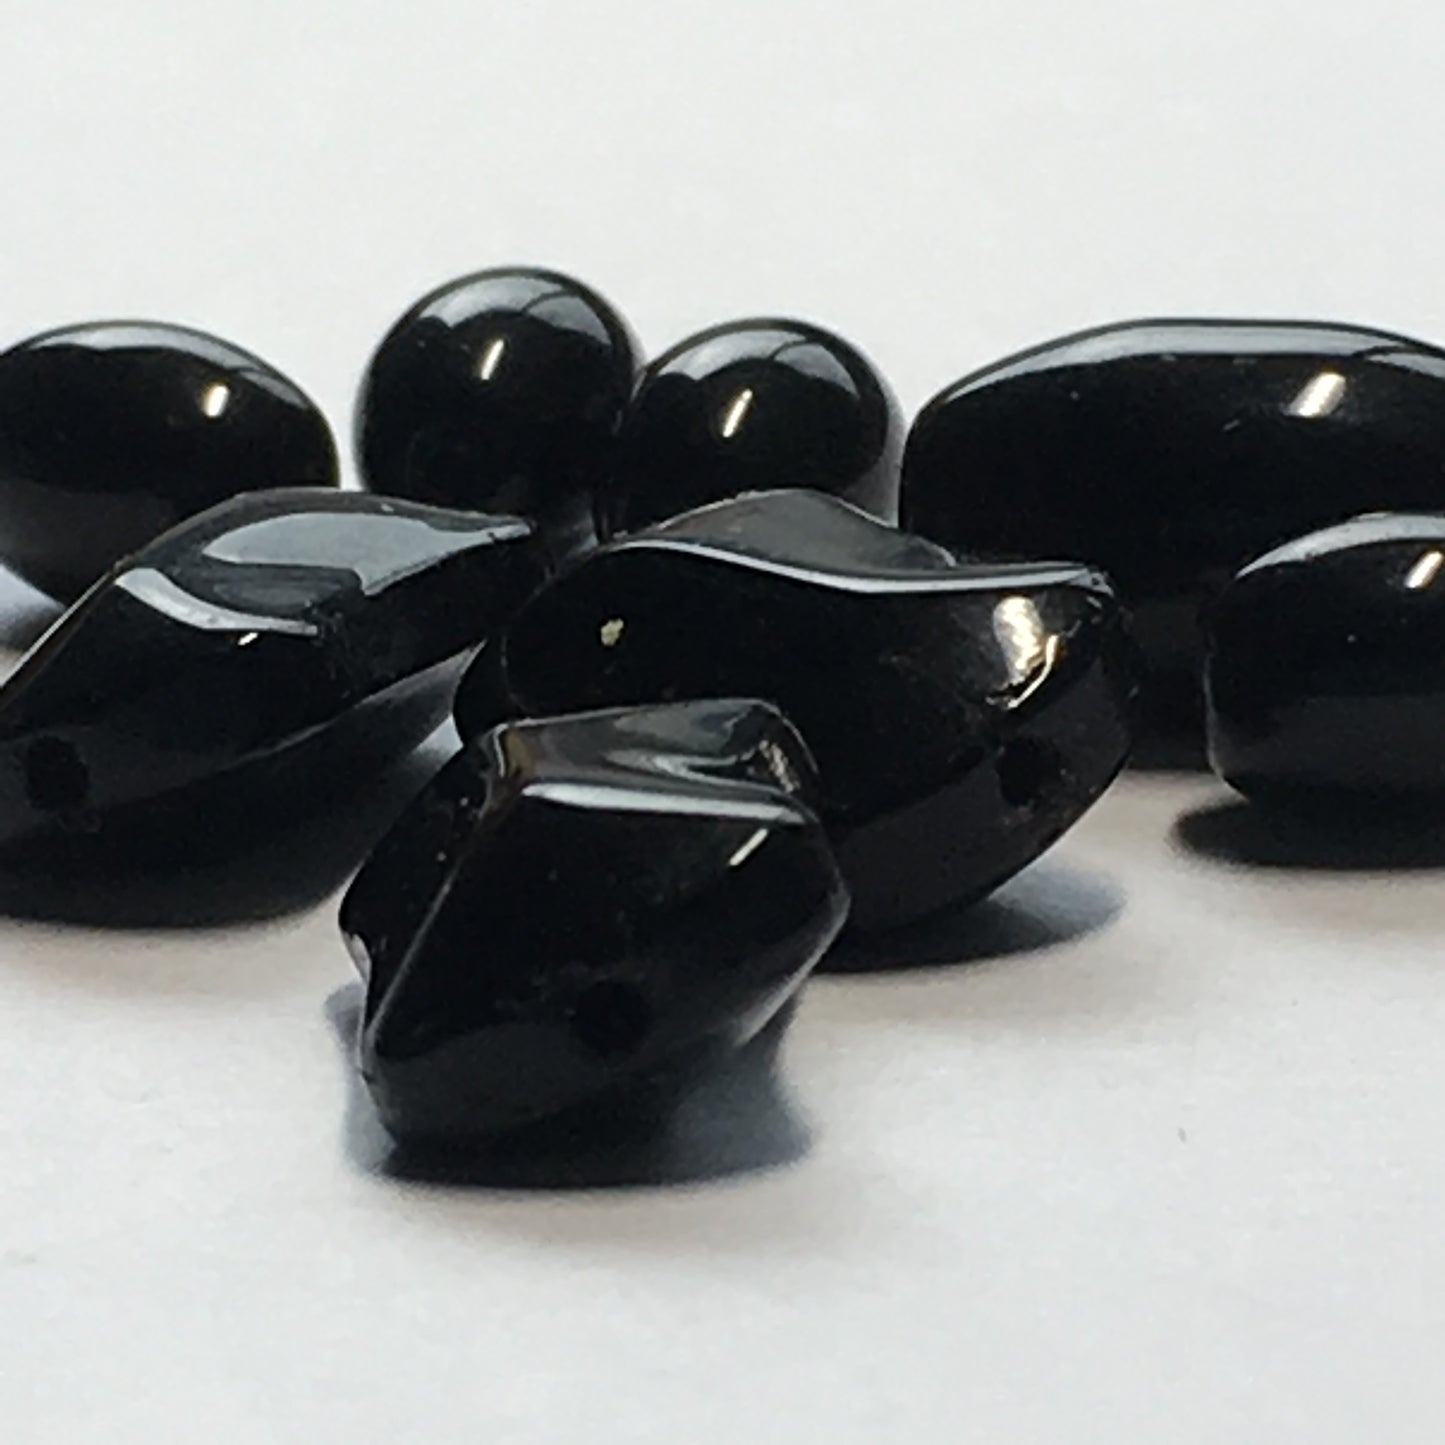 Opaque Black Glass, Oval and Pinched Rectangle Beads, 13 x 8, 8 x 6 and 14 x 9 x 6 mm, 8 Beads